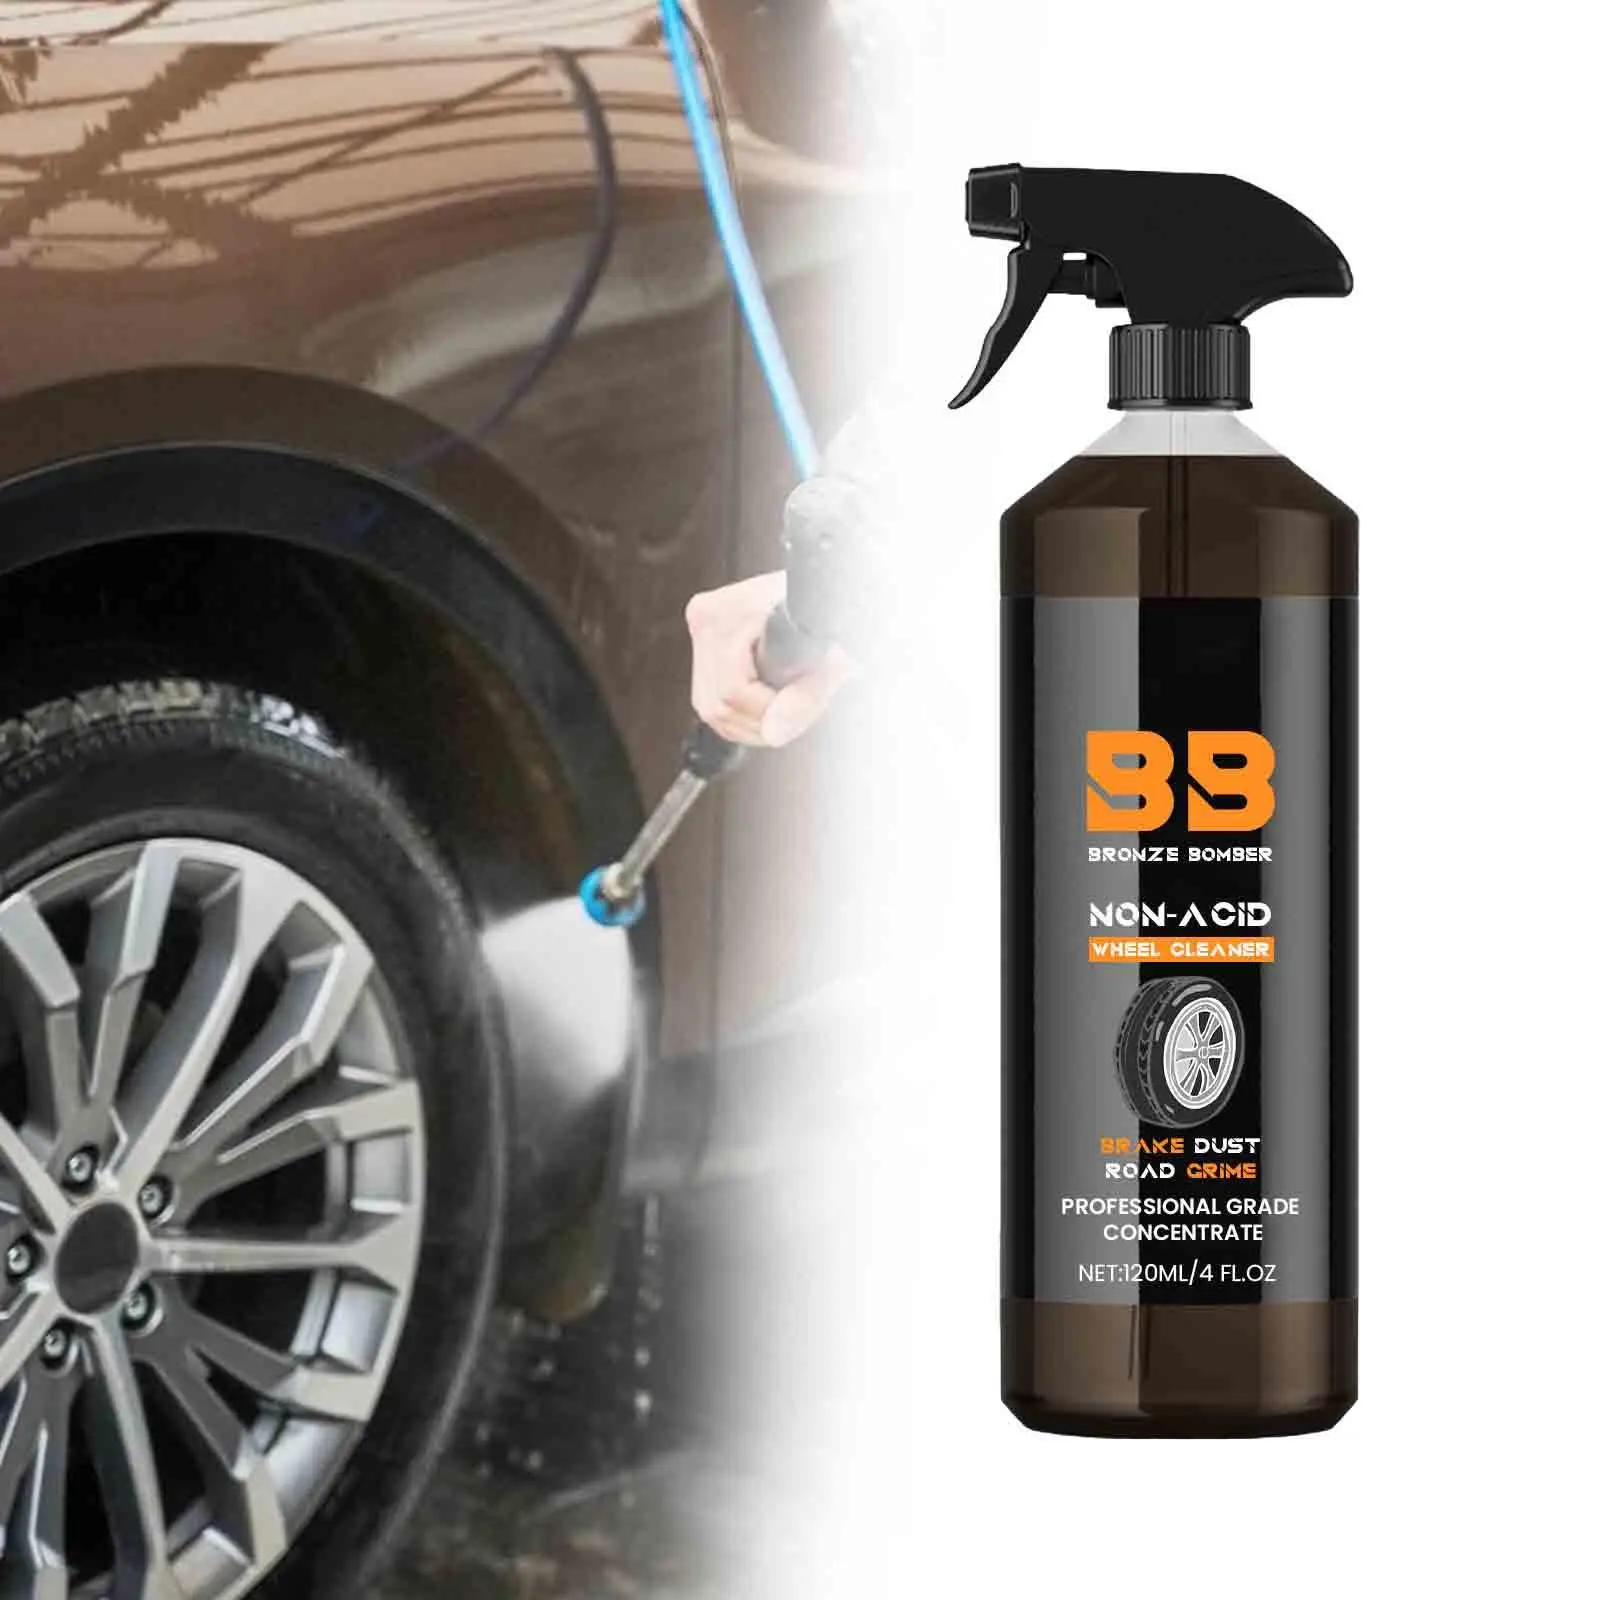 

Wheel and Tire Cleaner Safe for All Wheel Types 120ml 4 fl oz Dust Remover Rim Cleaner for Rvs Cars Motorcycles Suvs Trucks